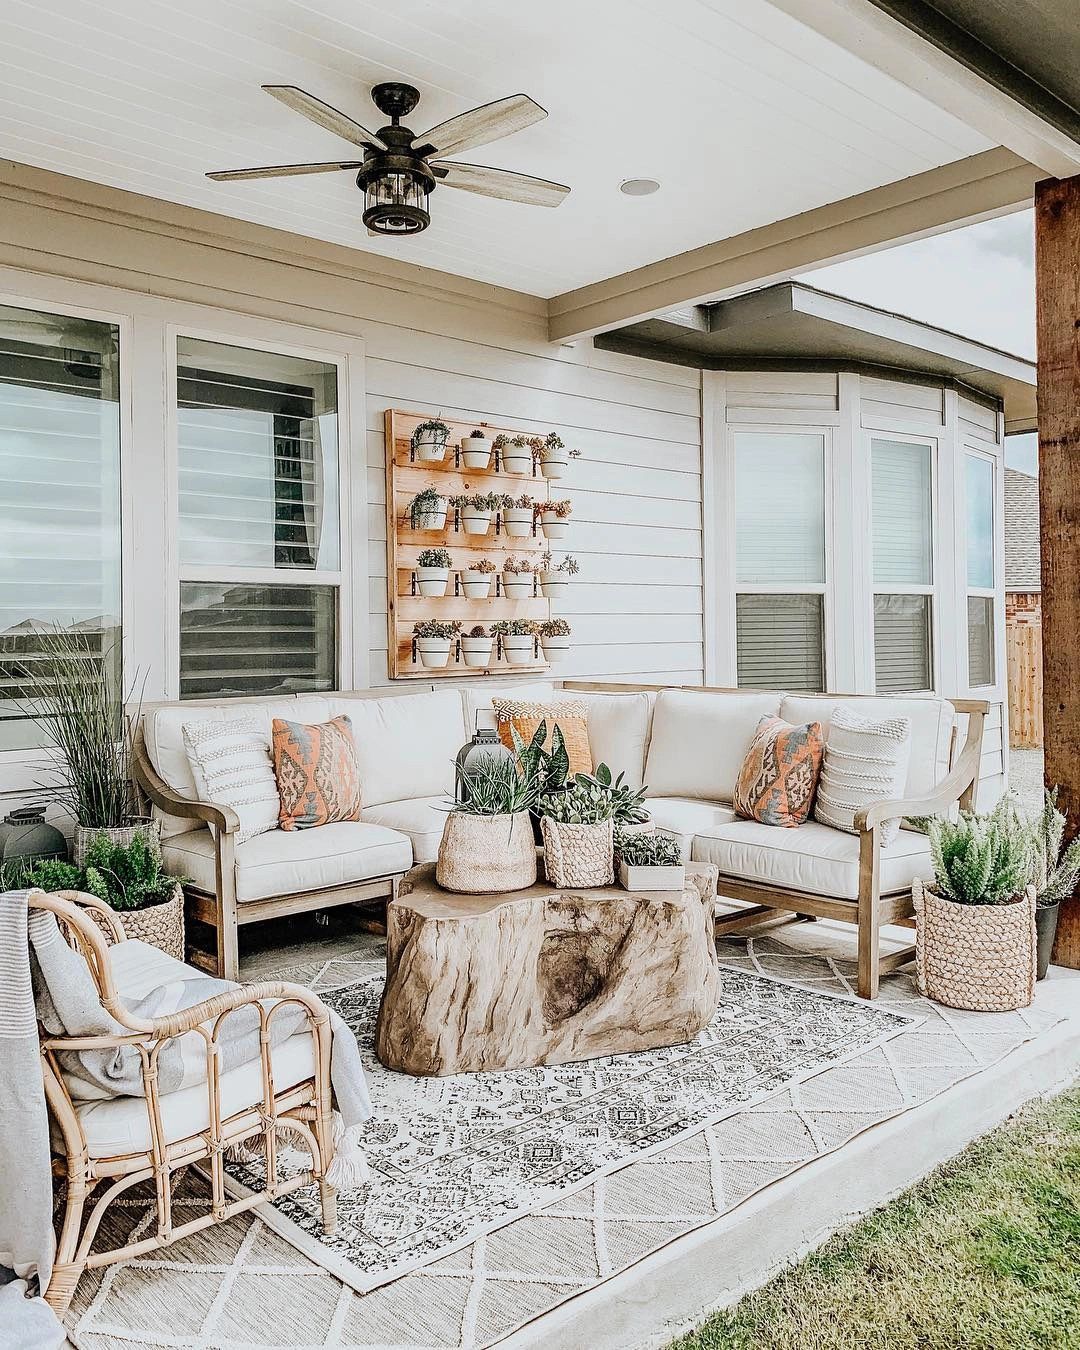 Stylish Outdoor Furniture Sets for Your Patio